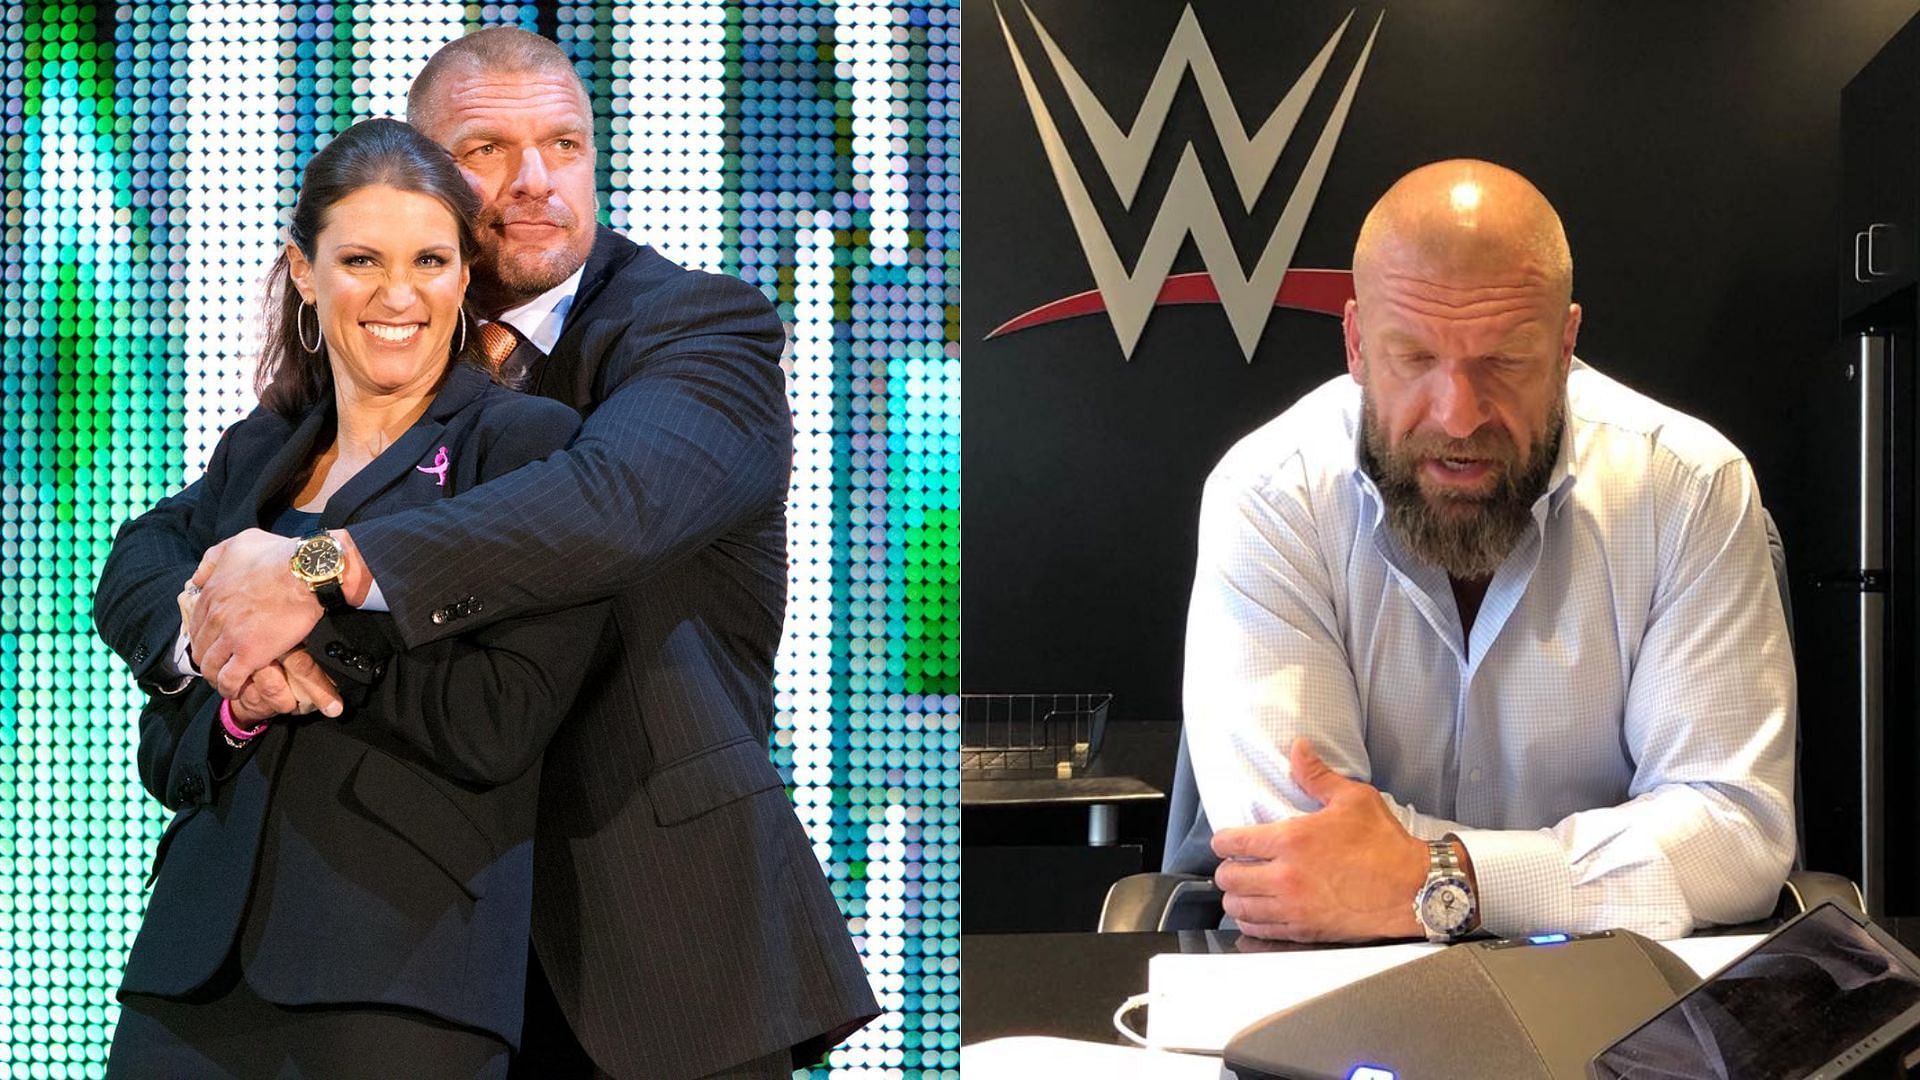 Stephanie McMahon and Triple H are often referred to as WWE